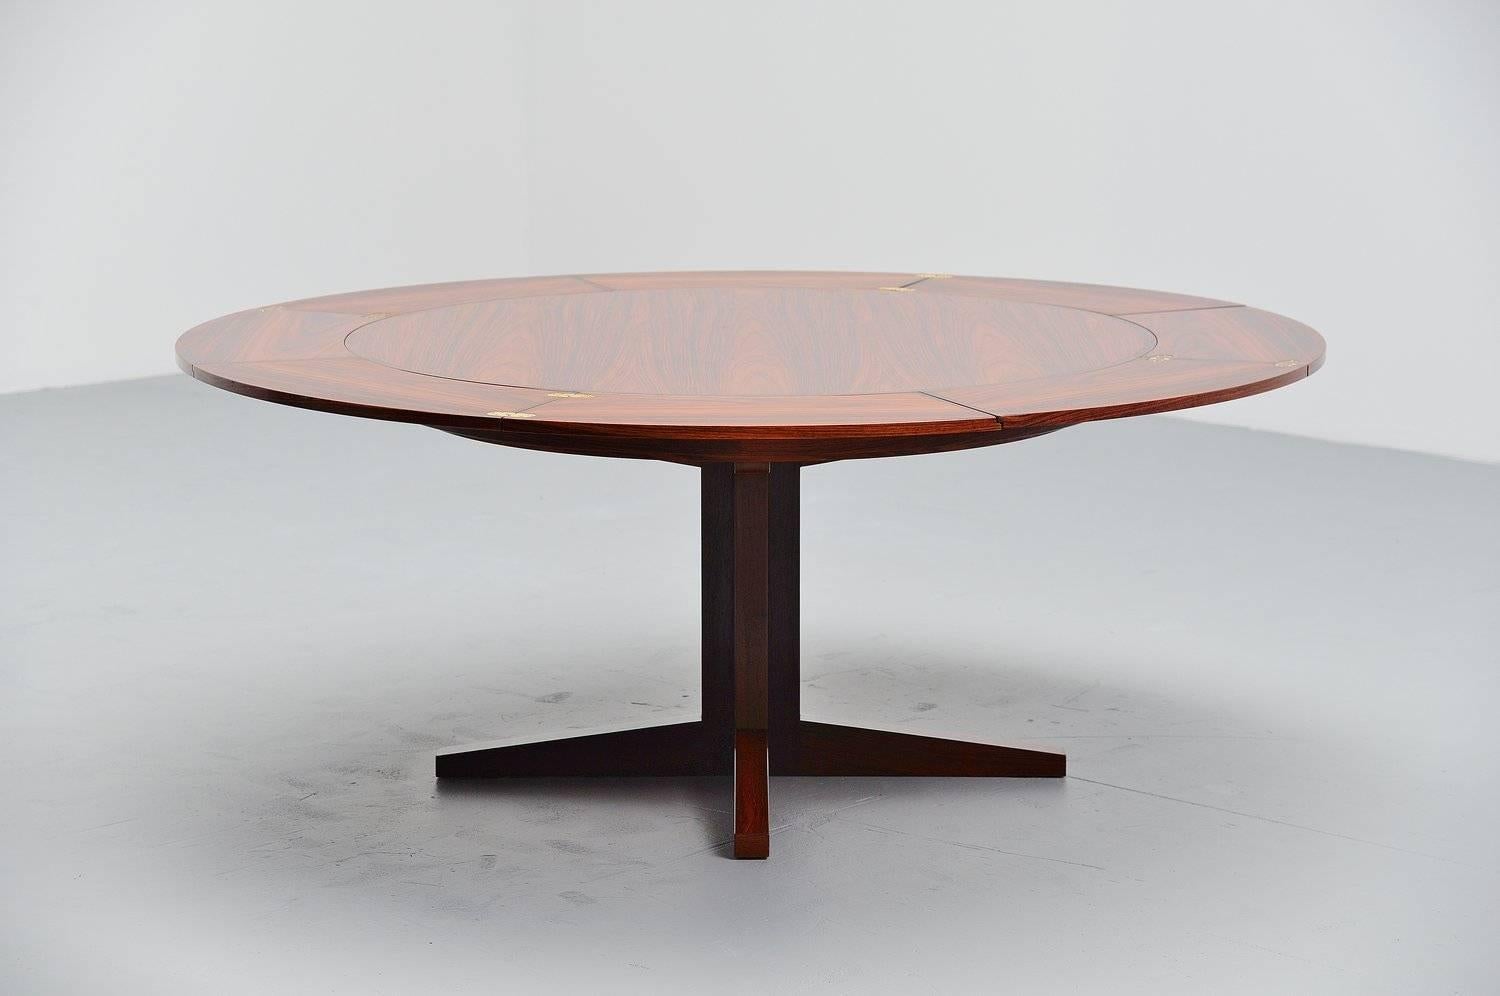 Spectacular rosewood dining table designed and manufactured by Dyrlund, Denmark, 1962. This amazing round table has a star-shaped base and can be extended by extracting the 4 2-pieced extraction leafs that are stored underneath the top. The width in